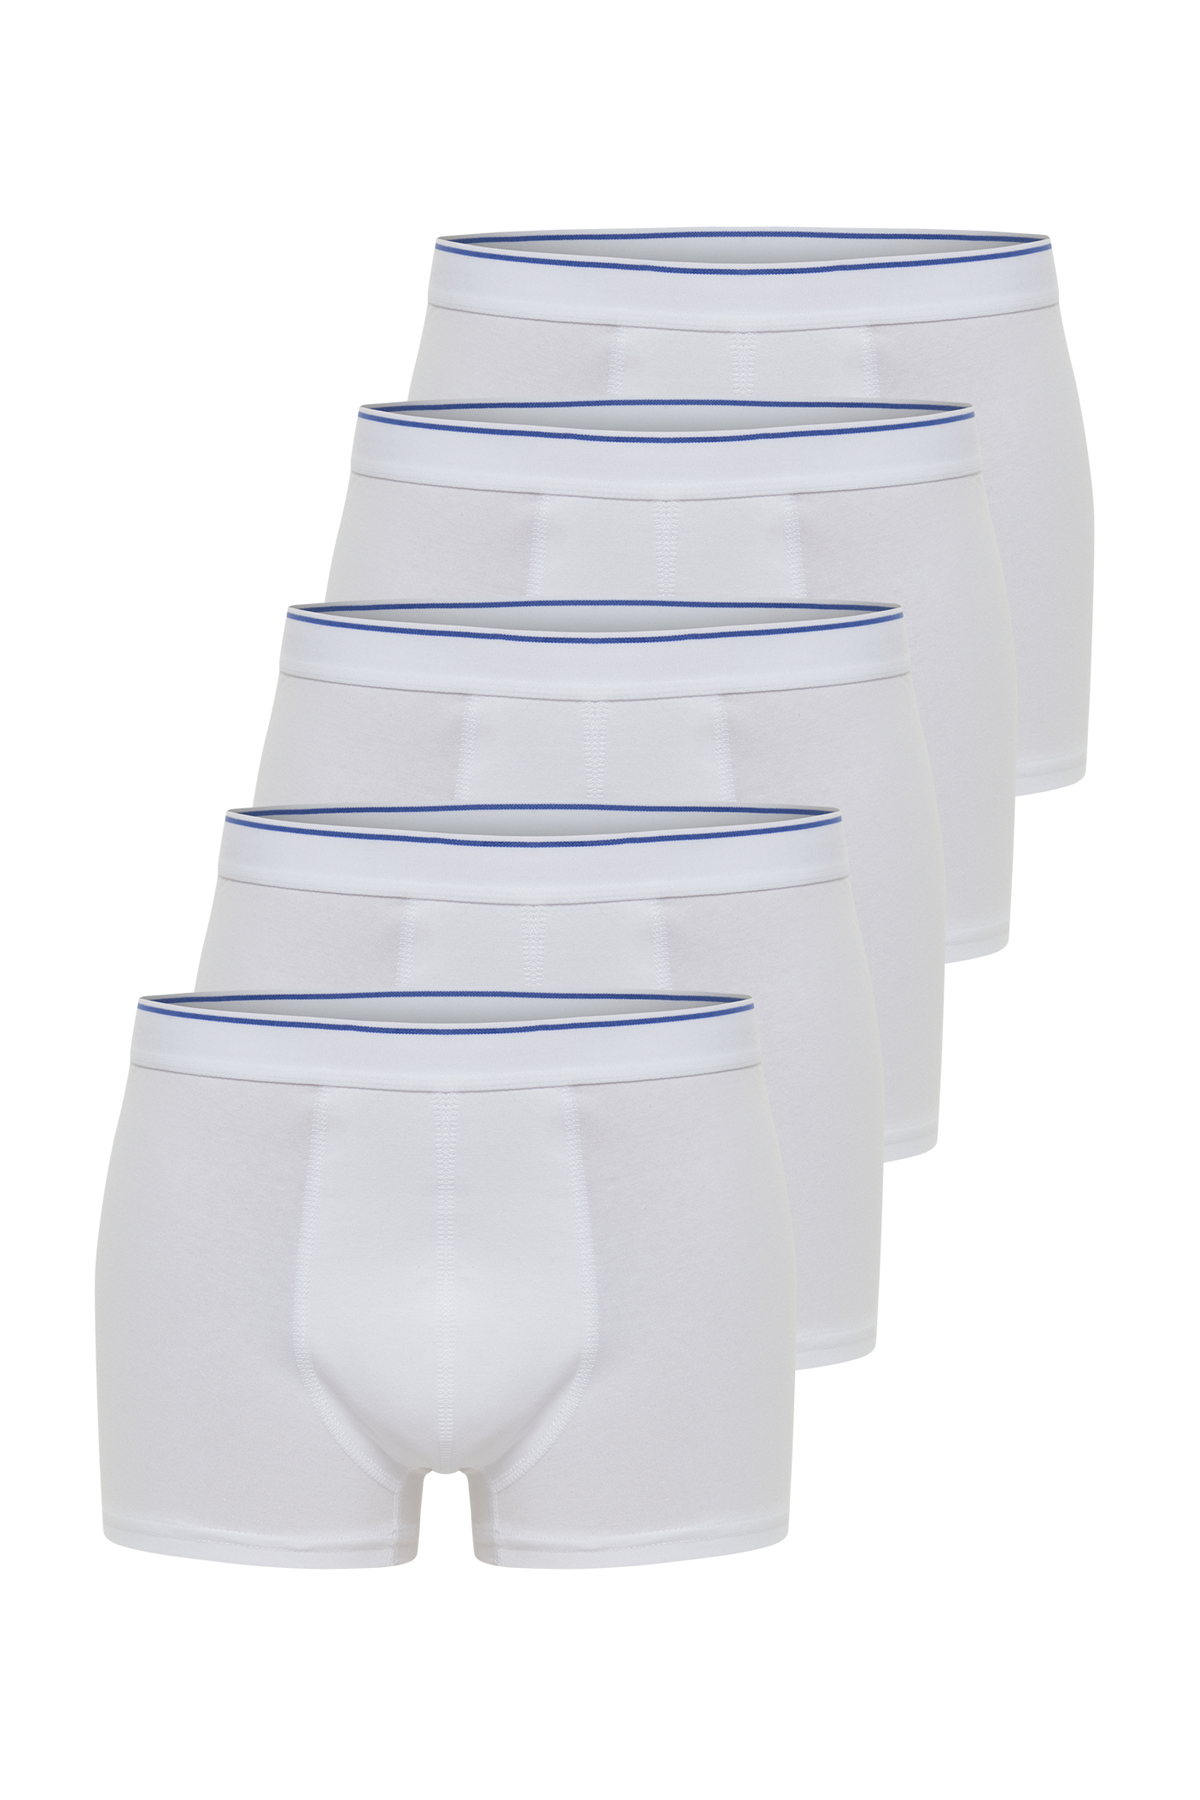 Trendyol White Multicolored Basic 5 Pack Cotton Boxers